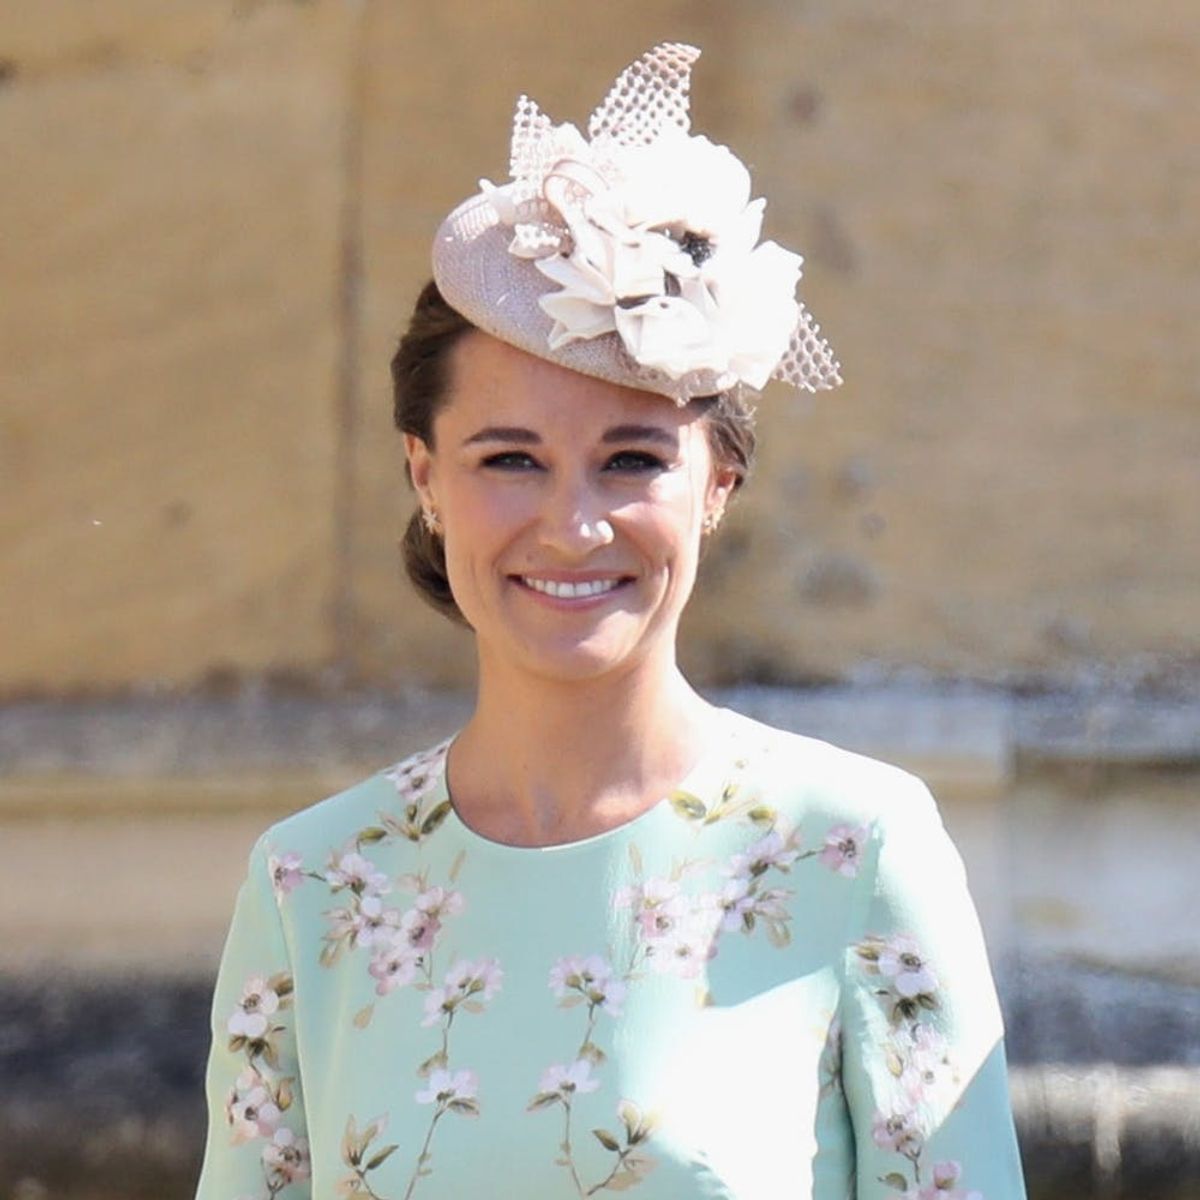 Pippa Middleton Confirms She’s Pregnant With Her First Child